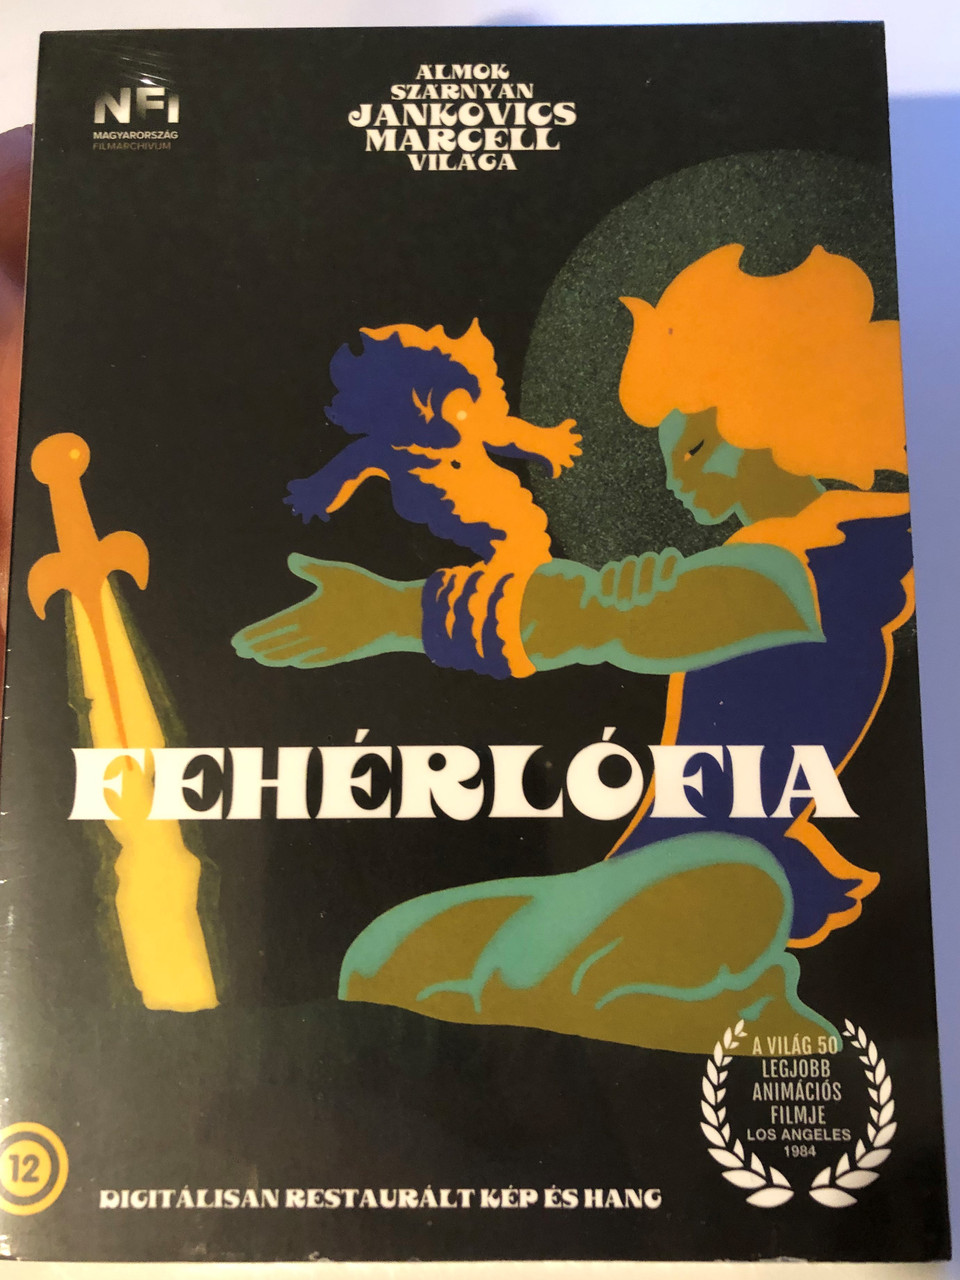 FEHÉRLÓFIA - Son of the White Mare DVD 1983 / Colour Animation Hungary /  Directed by Jankovics Marcell - Bible in My Language